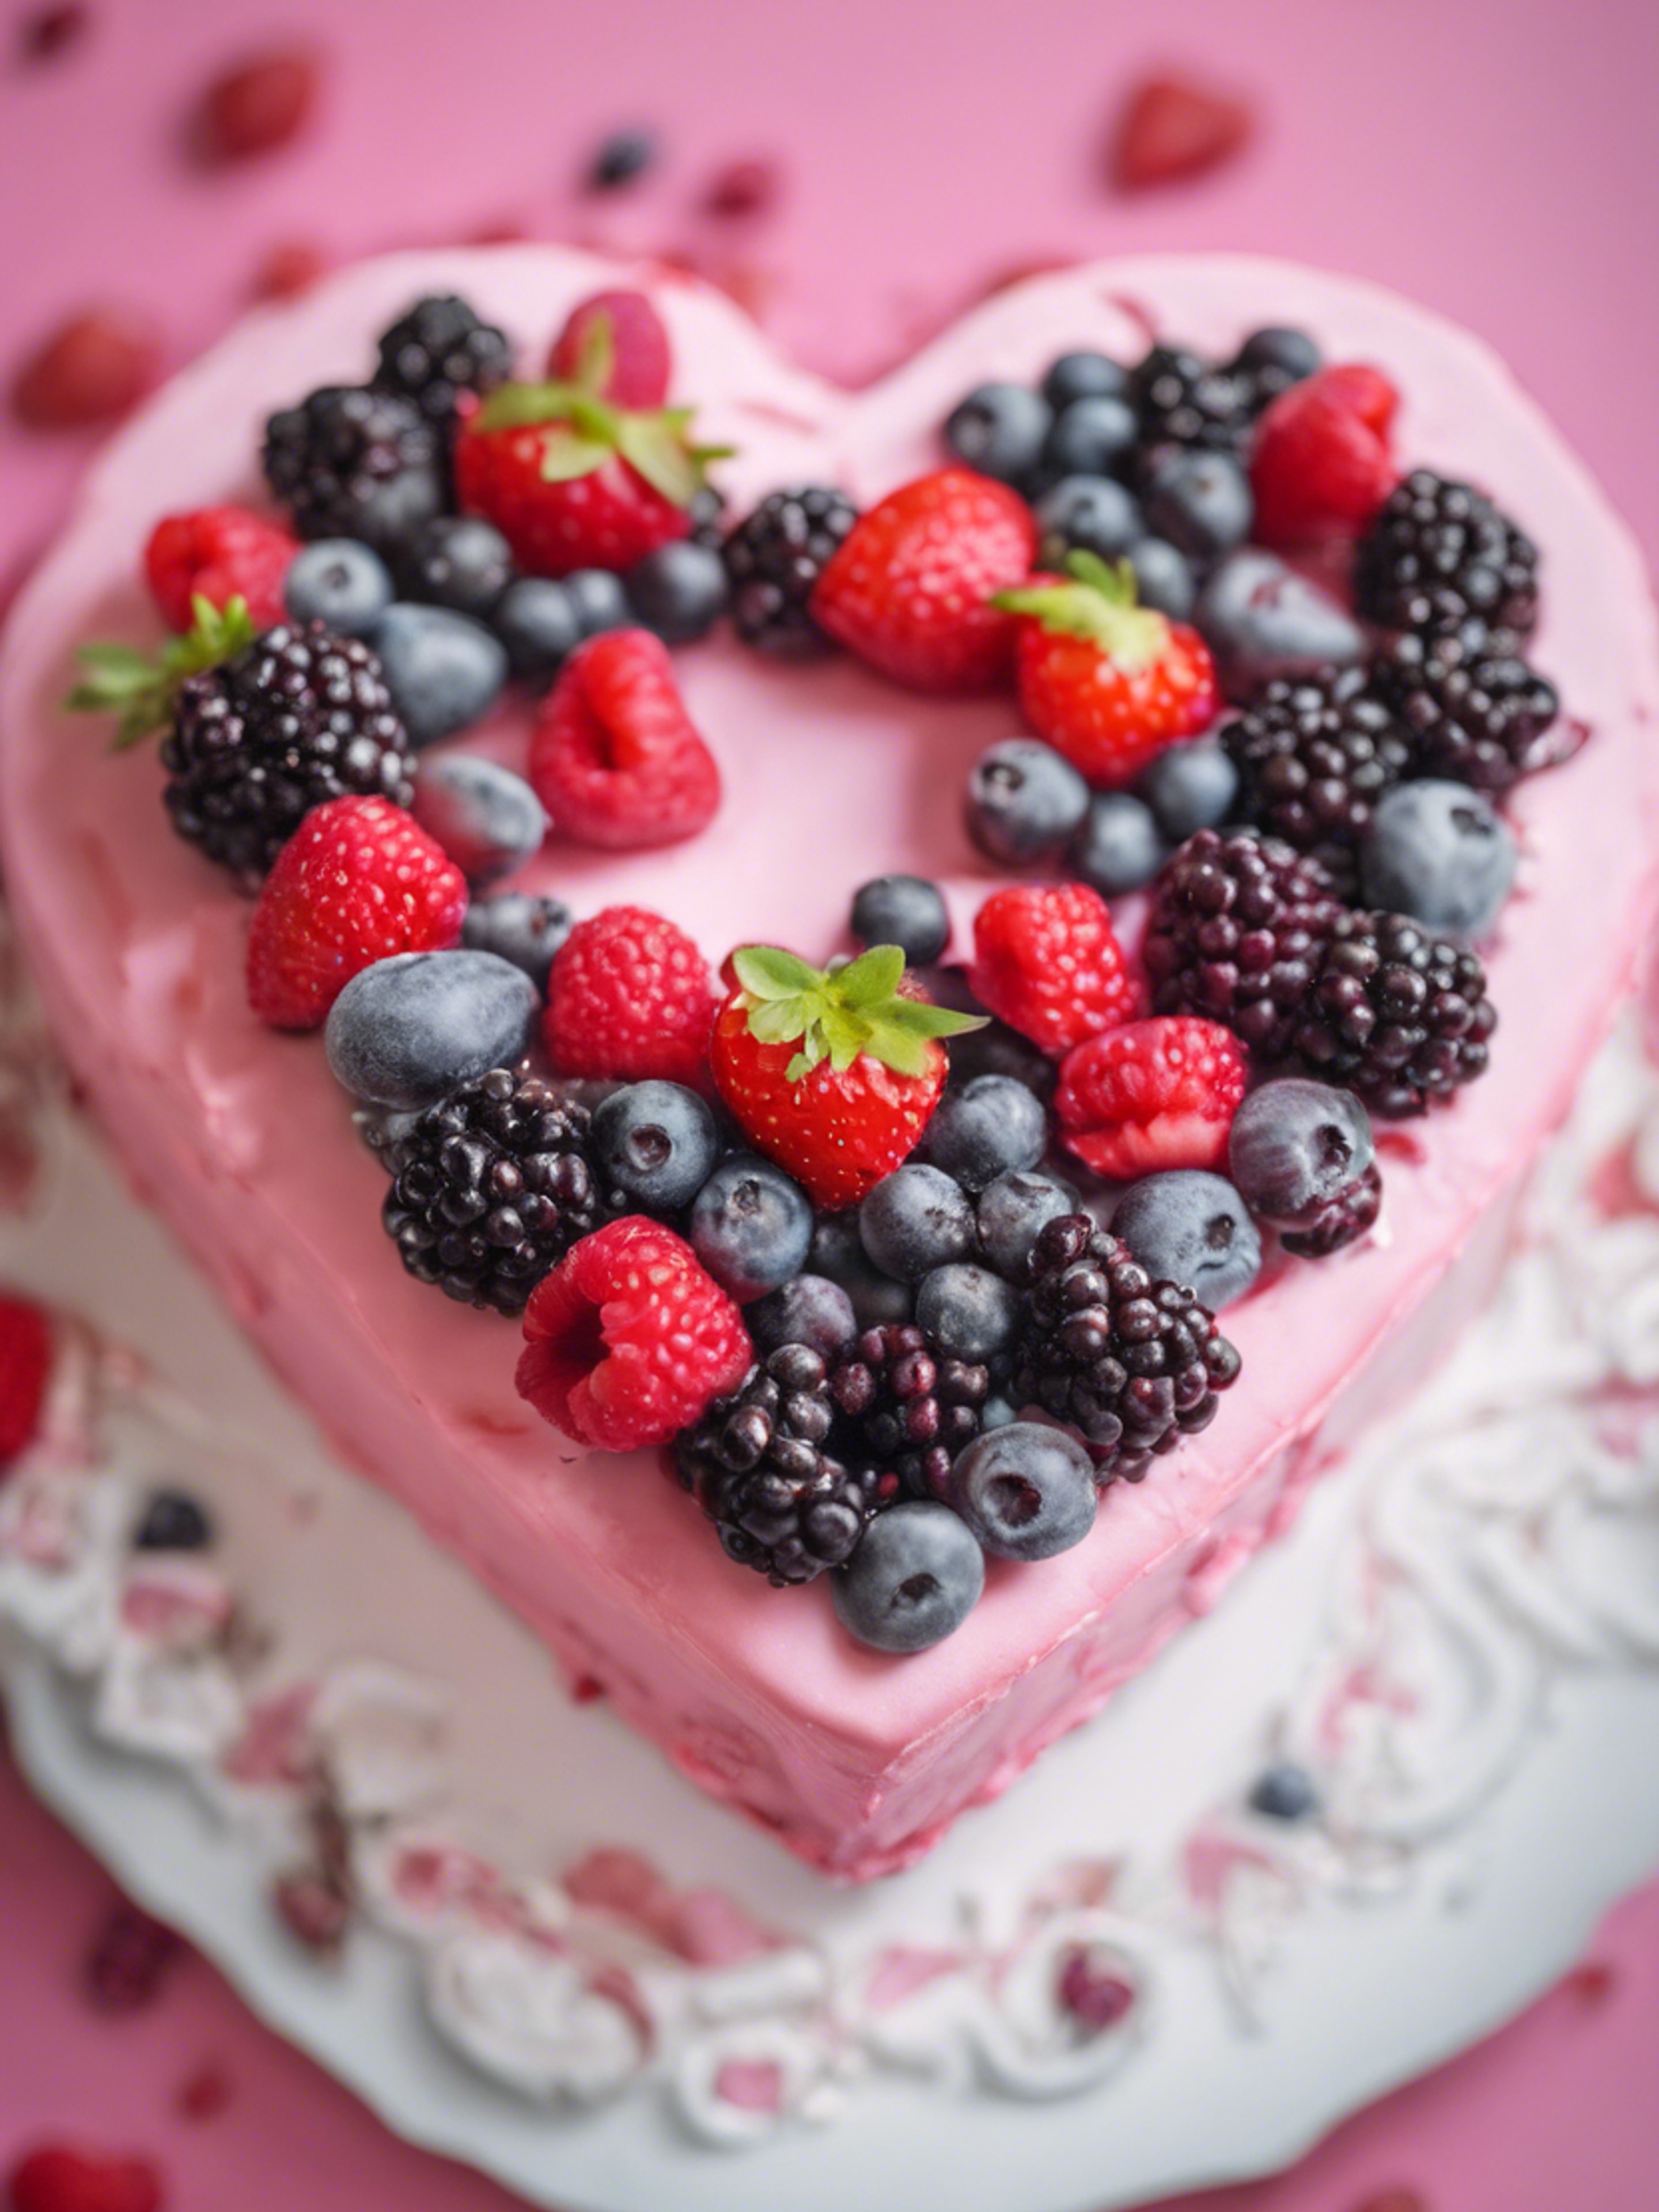 A pink heart shaped cake topped with assorted berries. Tapeta[c4a6a00ea89247258077]